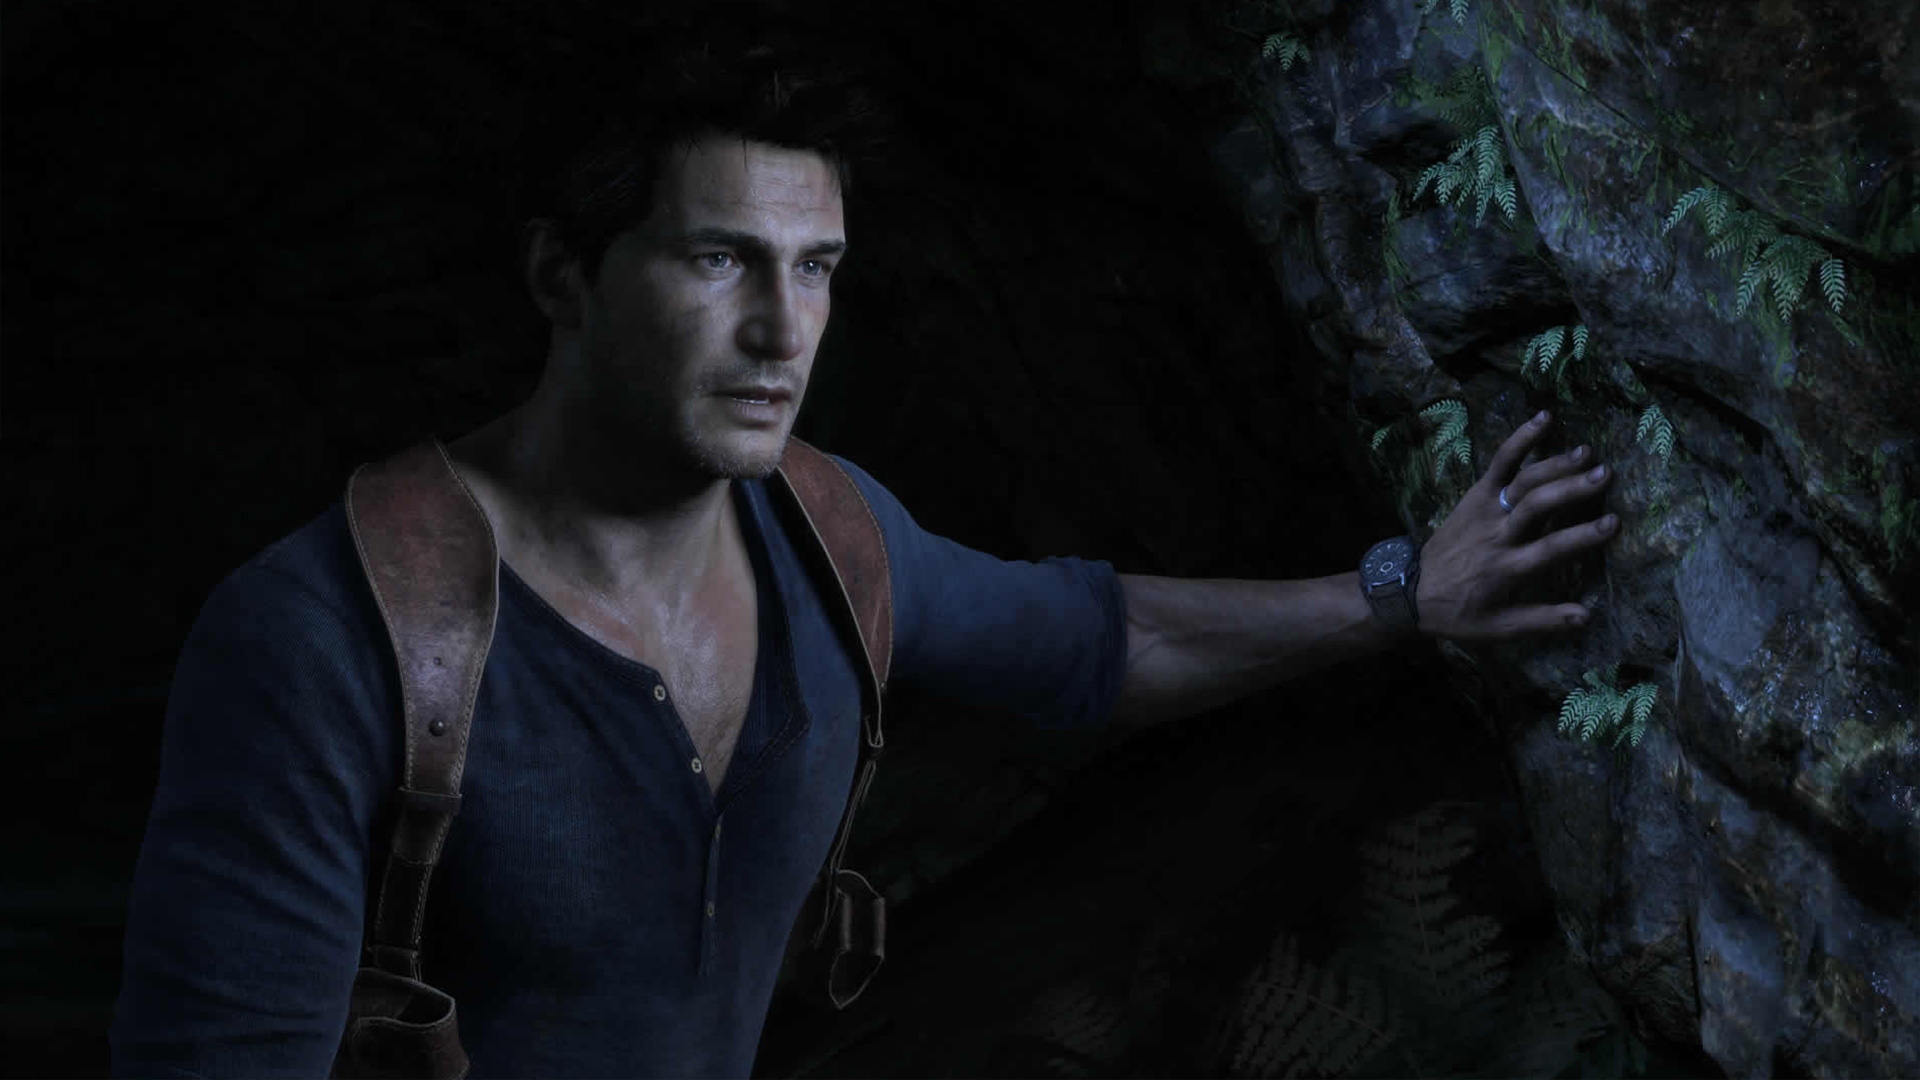 Nathan Drake Is A Singular Hero In Our Cynical Culture